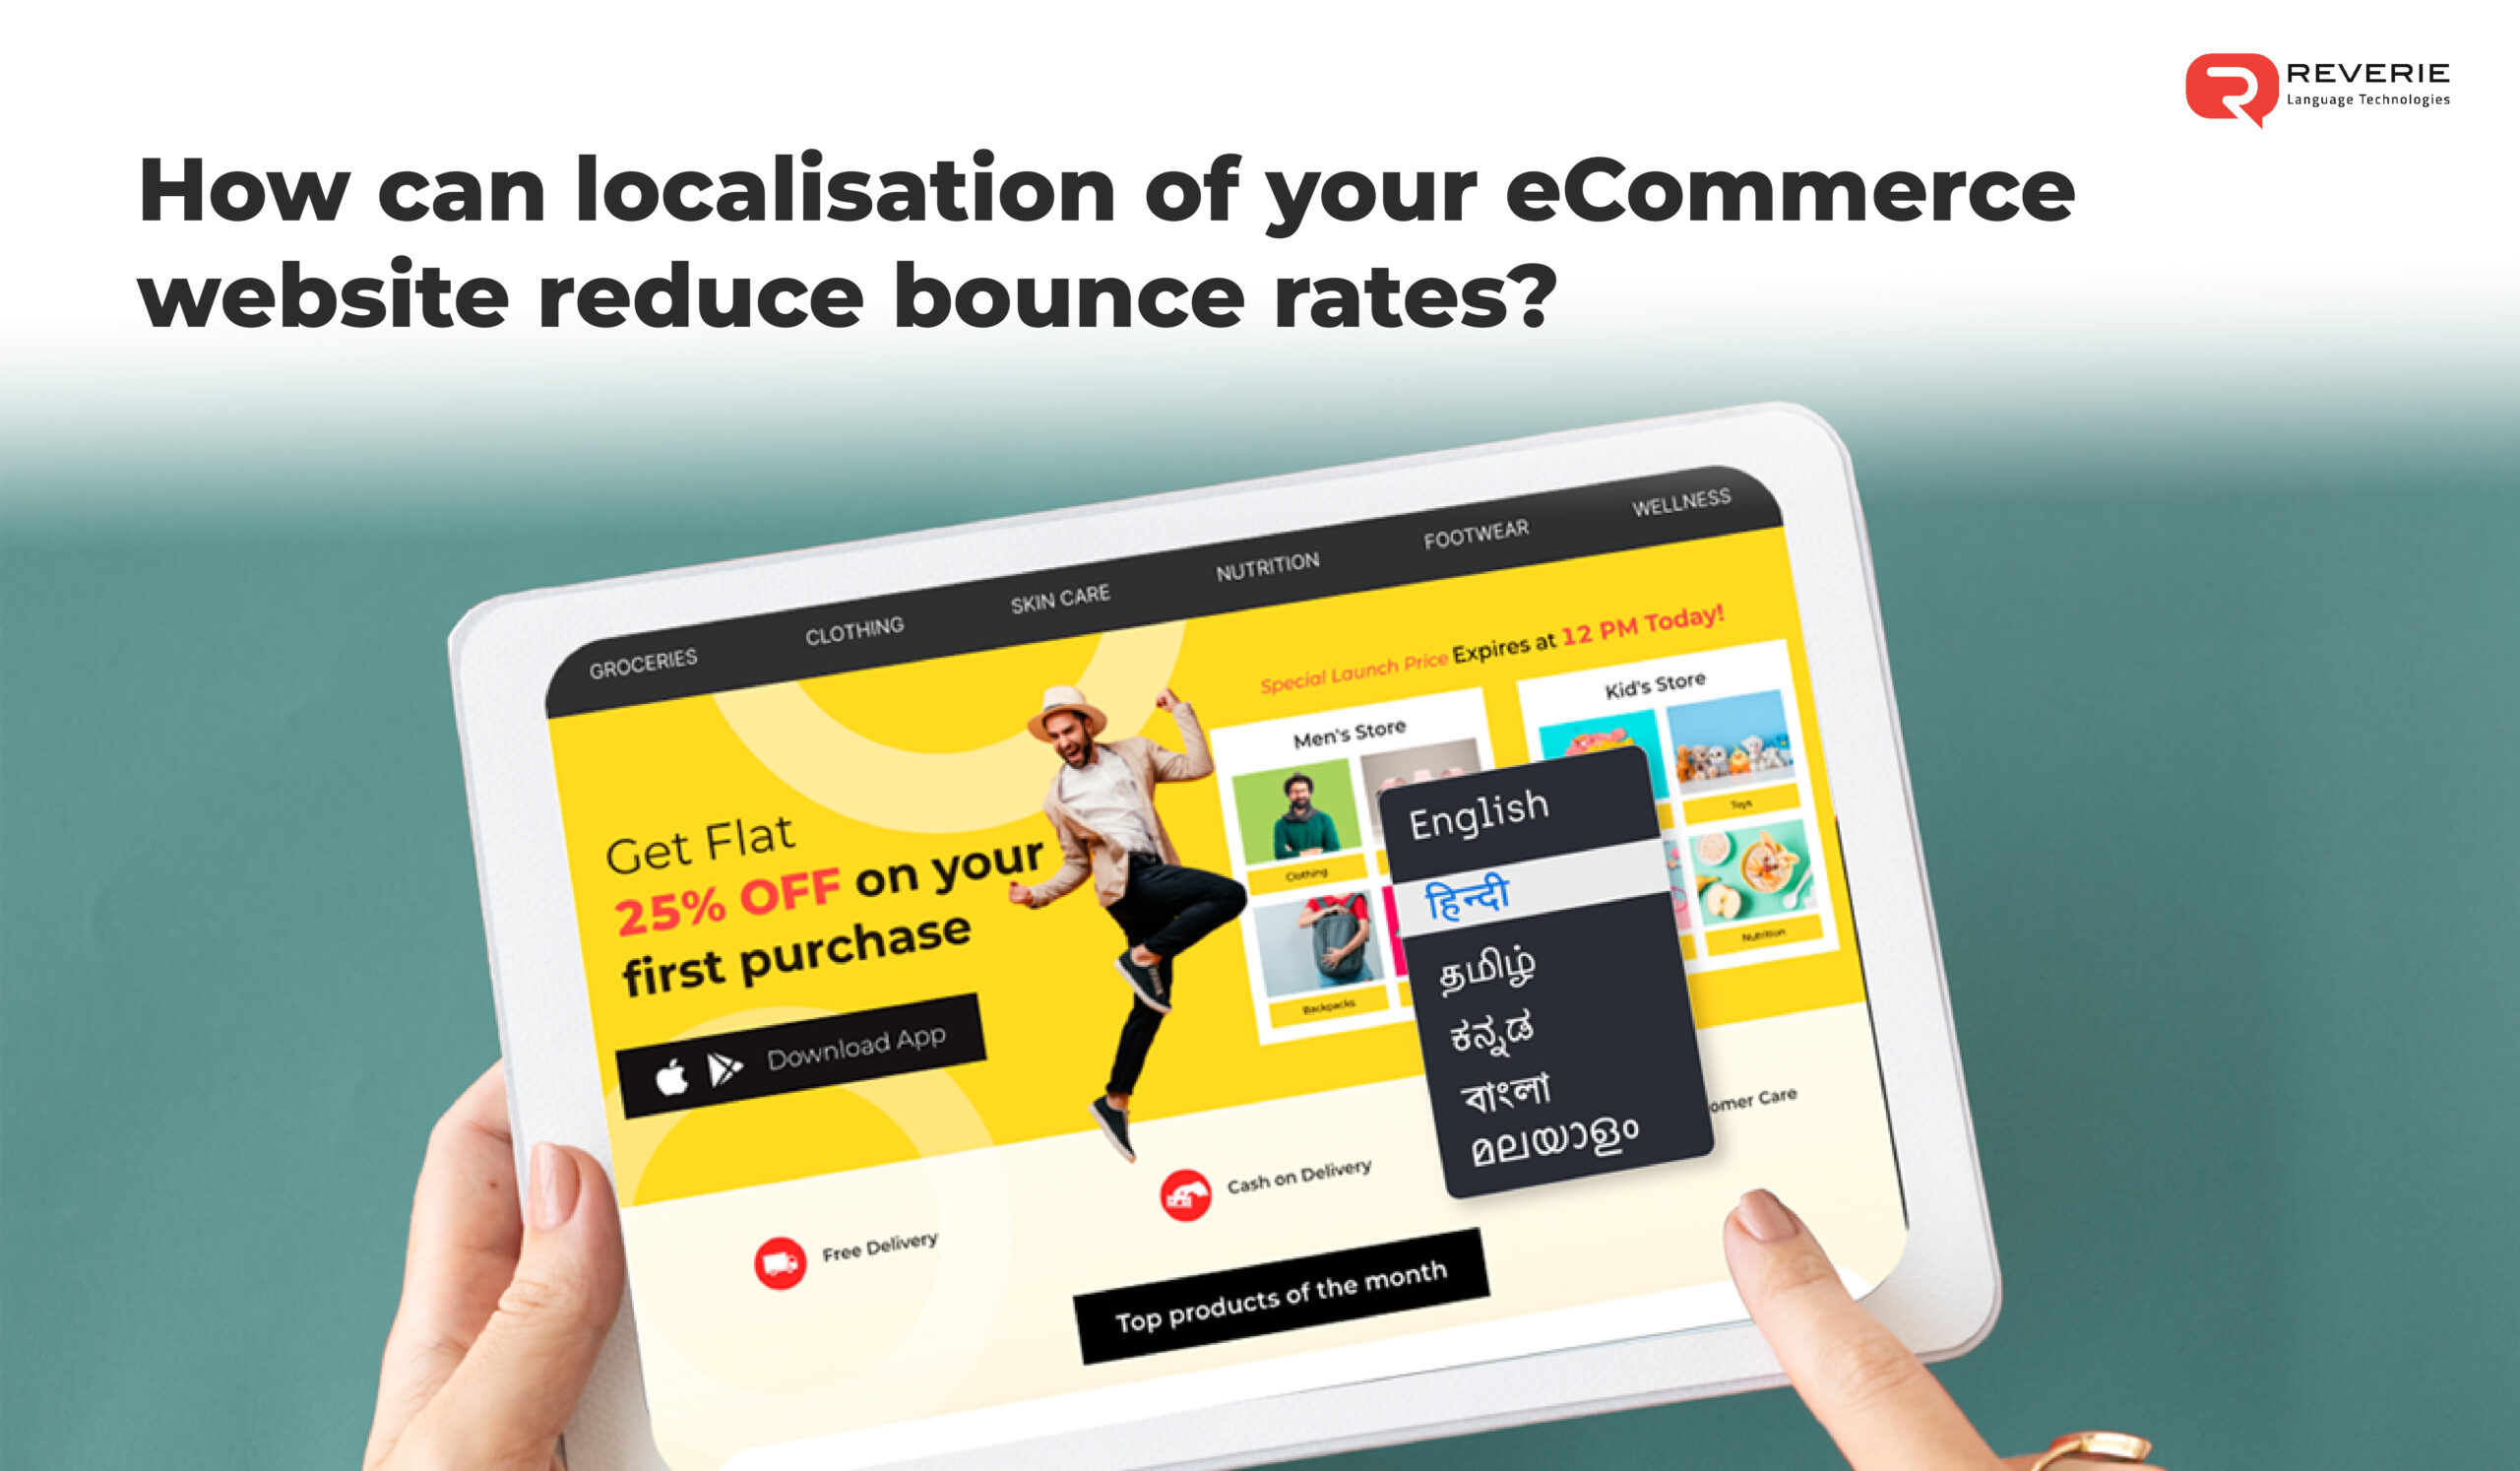 How can localisation of your eCommerce website reduce bounce rates